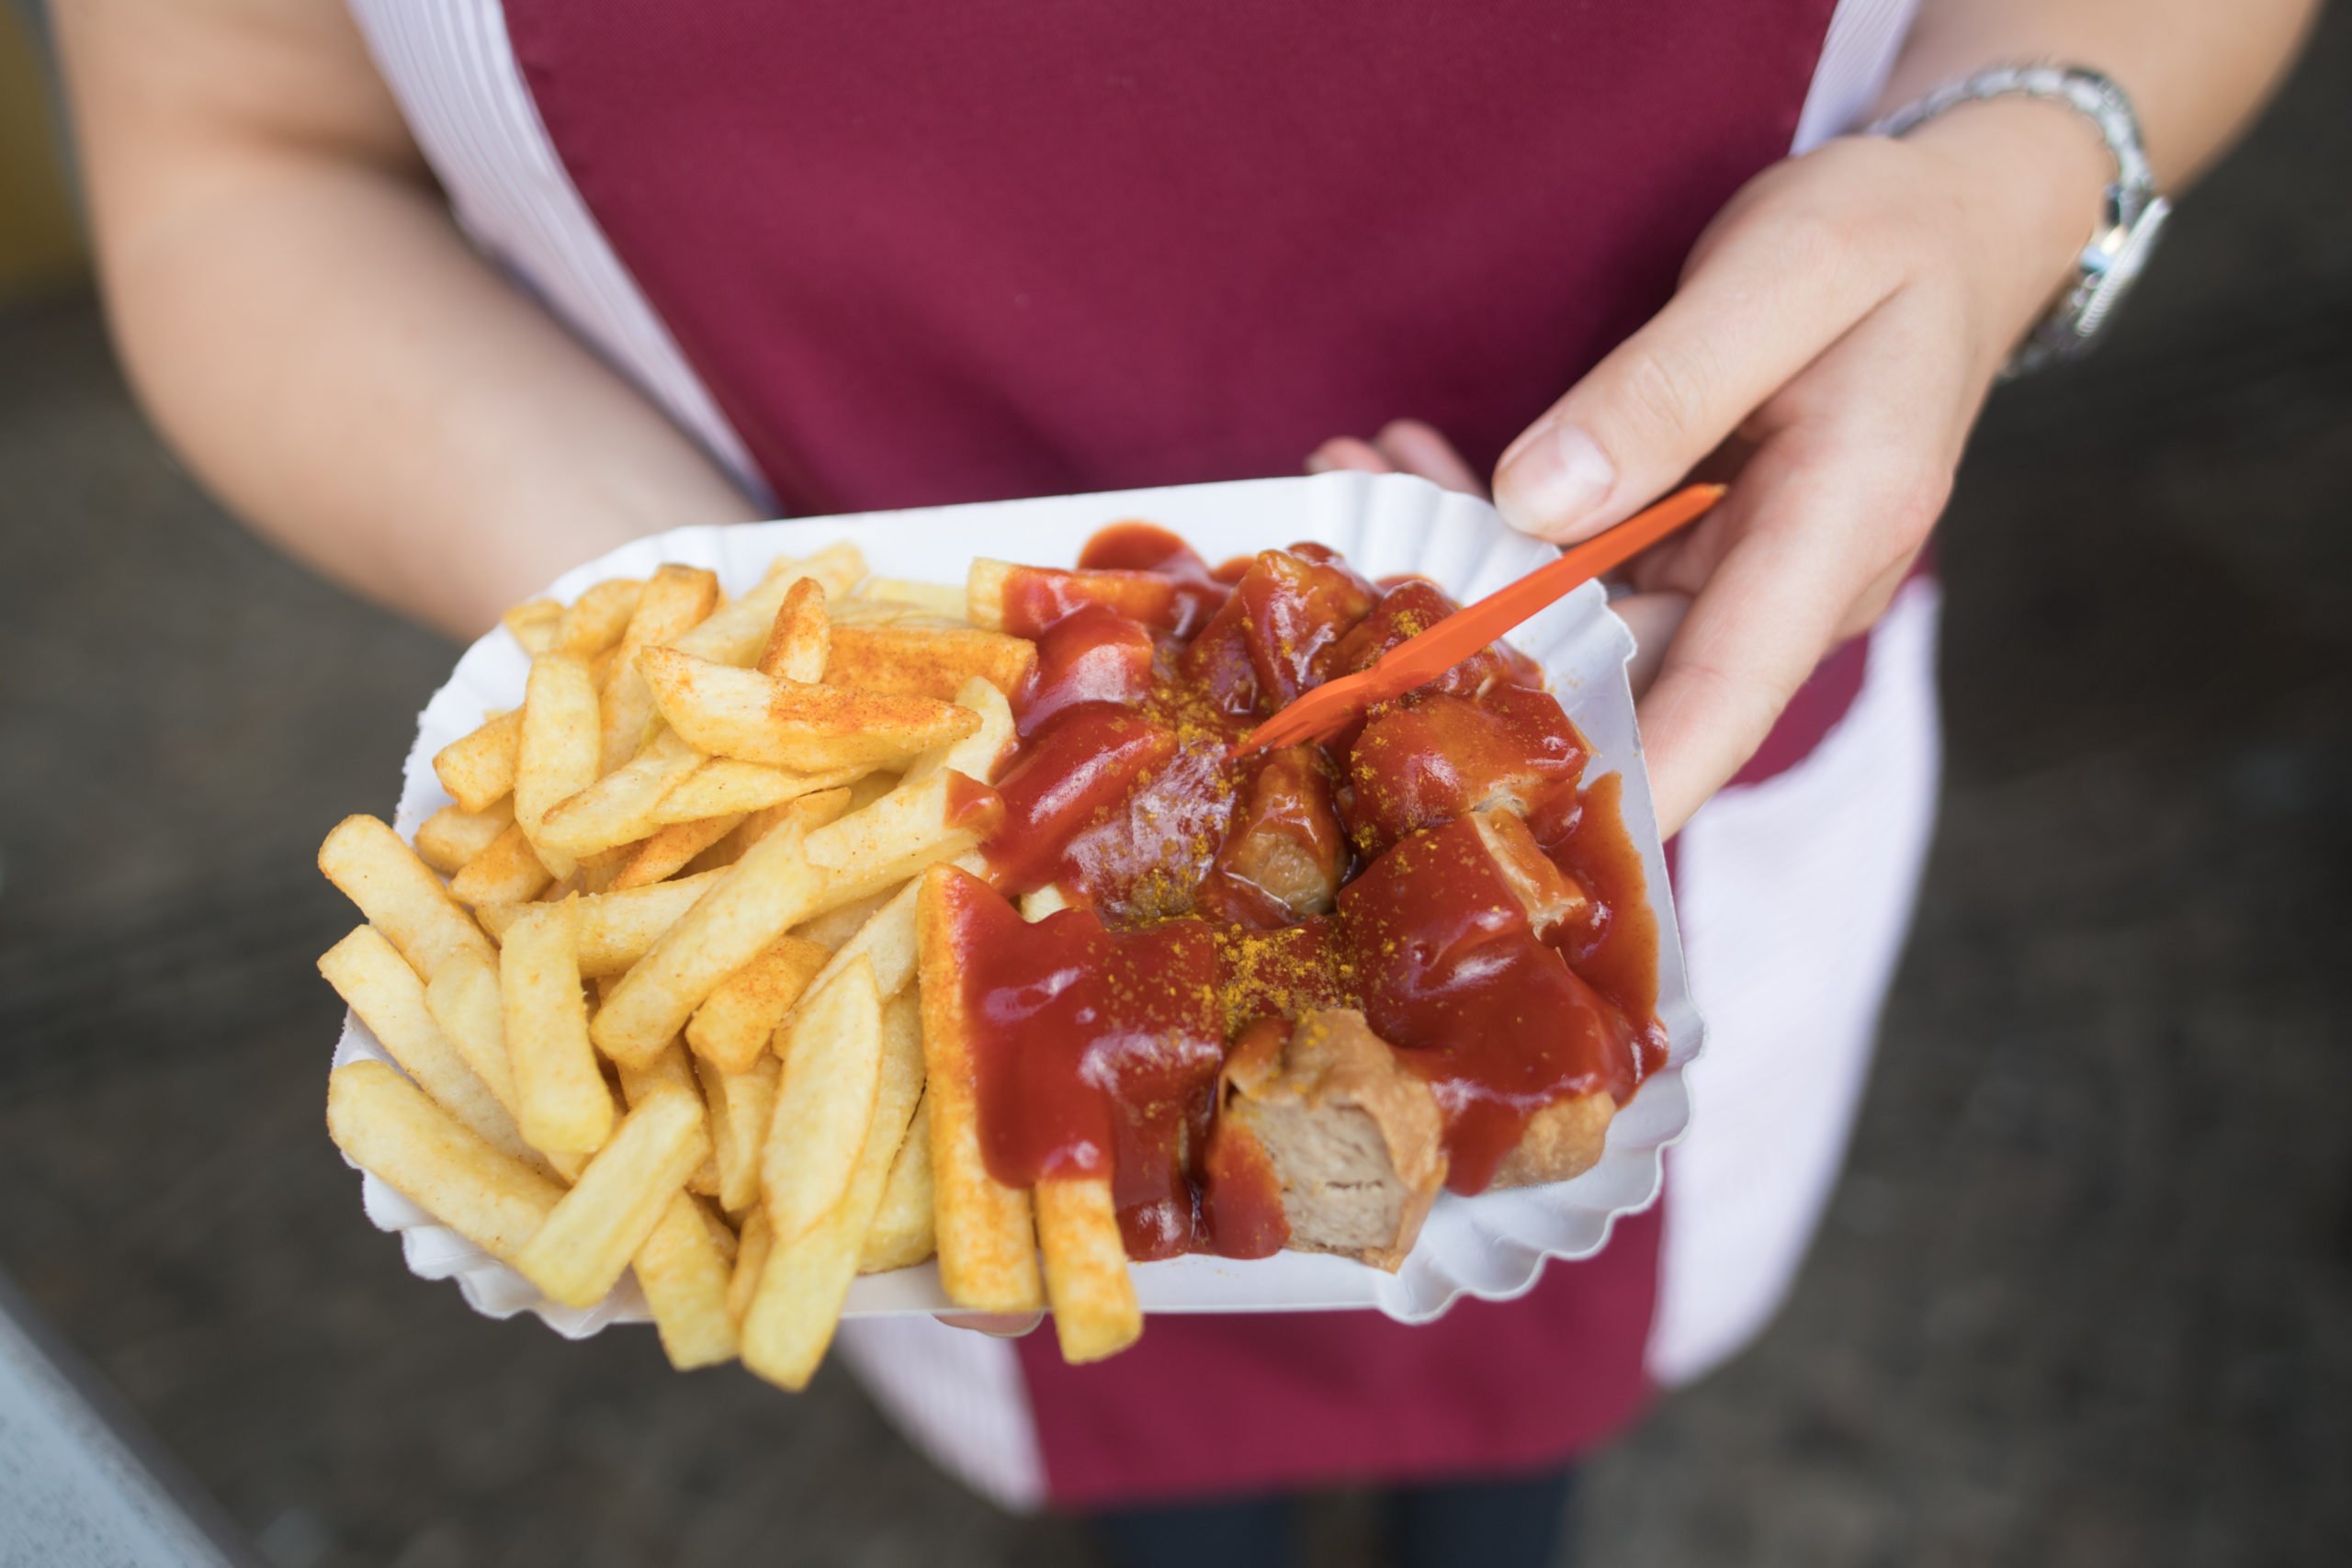 A plate of Currywurst and chips in Berlin.